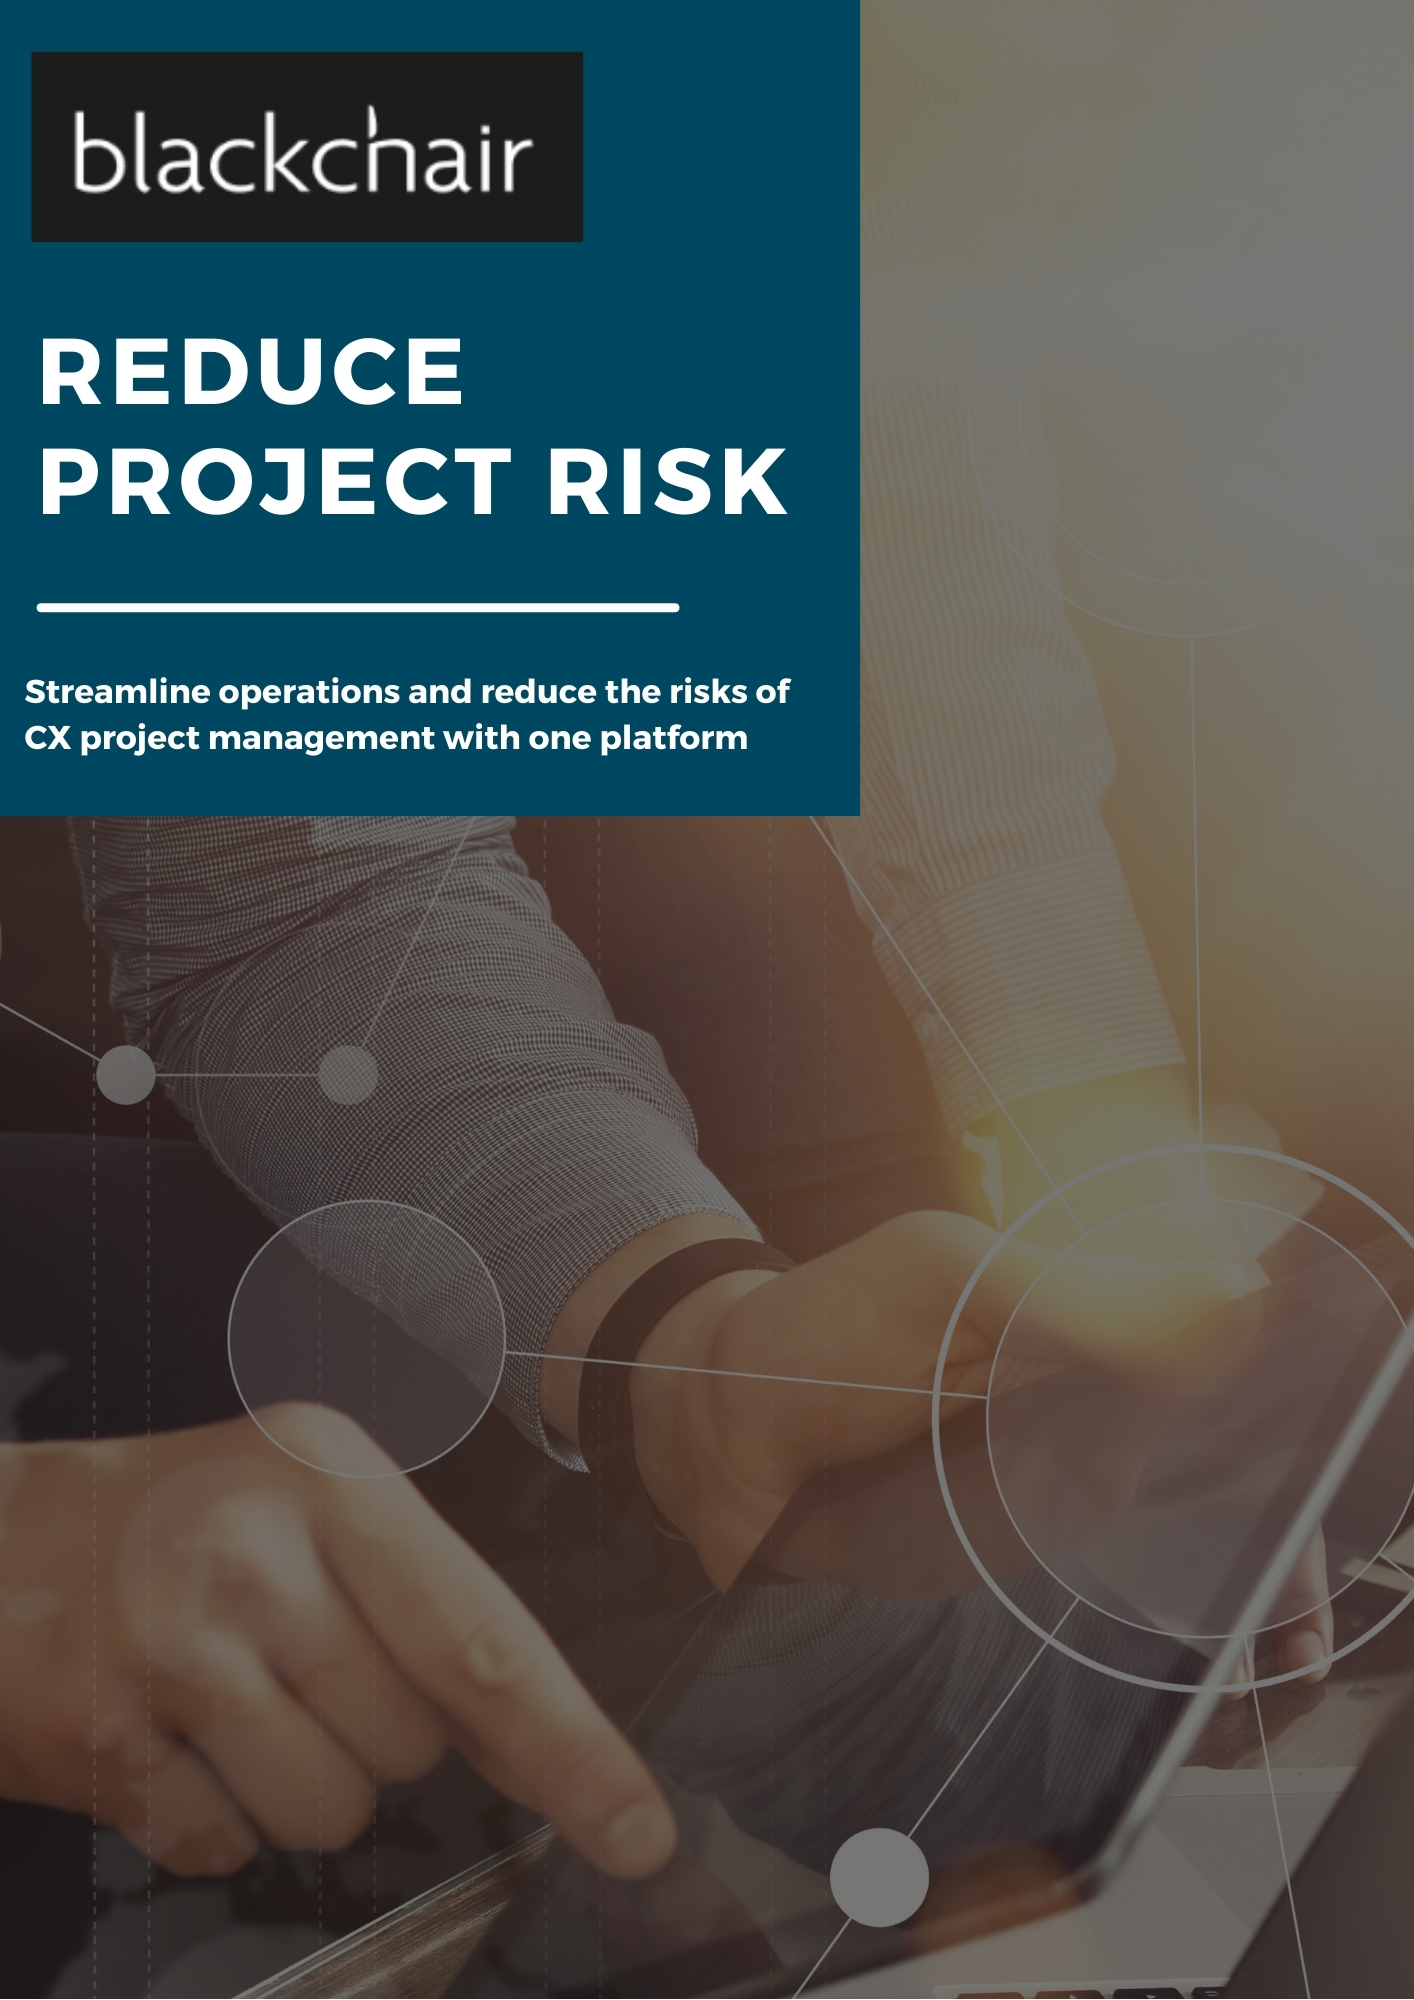 Blackchair - Brochures - Reduce Project Risk Streamline Operations And Reduce CX Project Management Risks